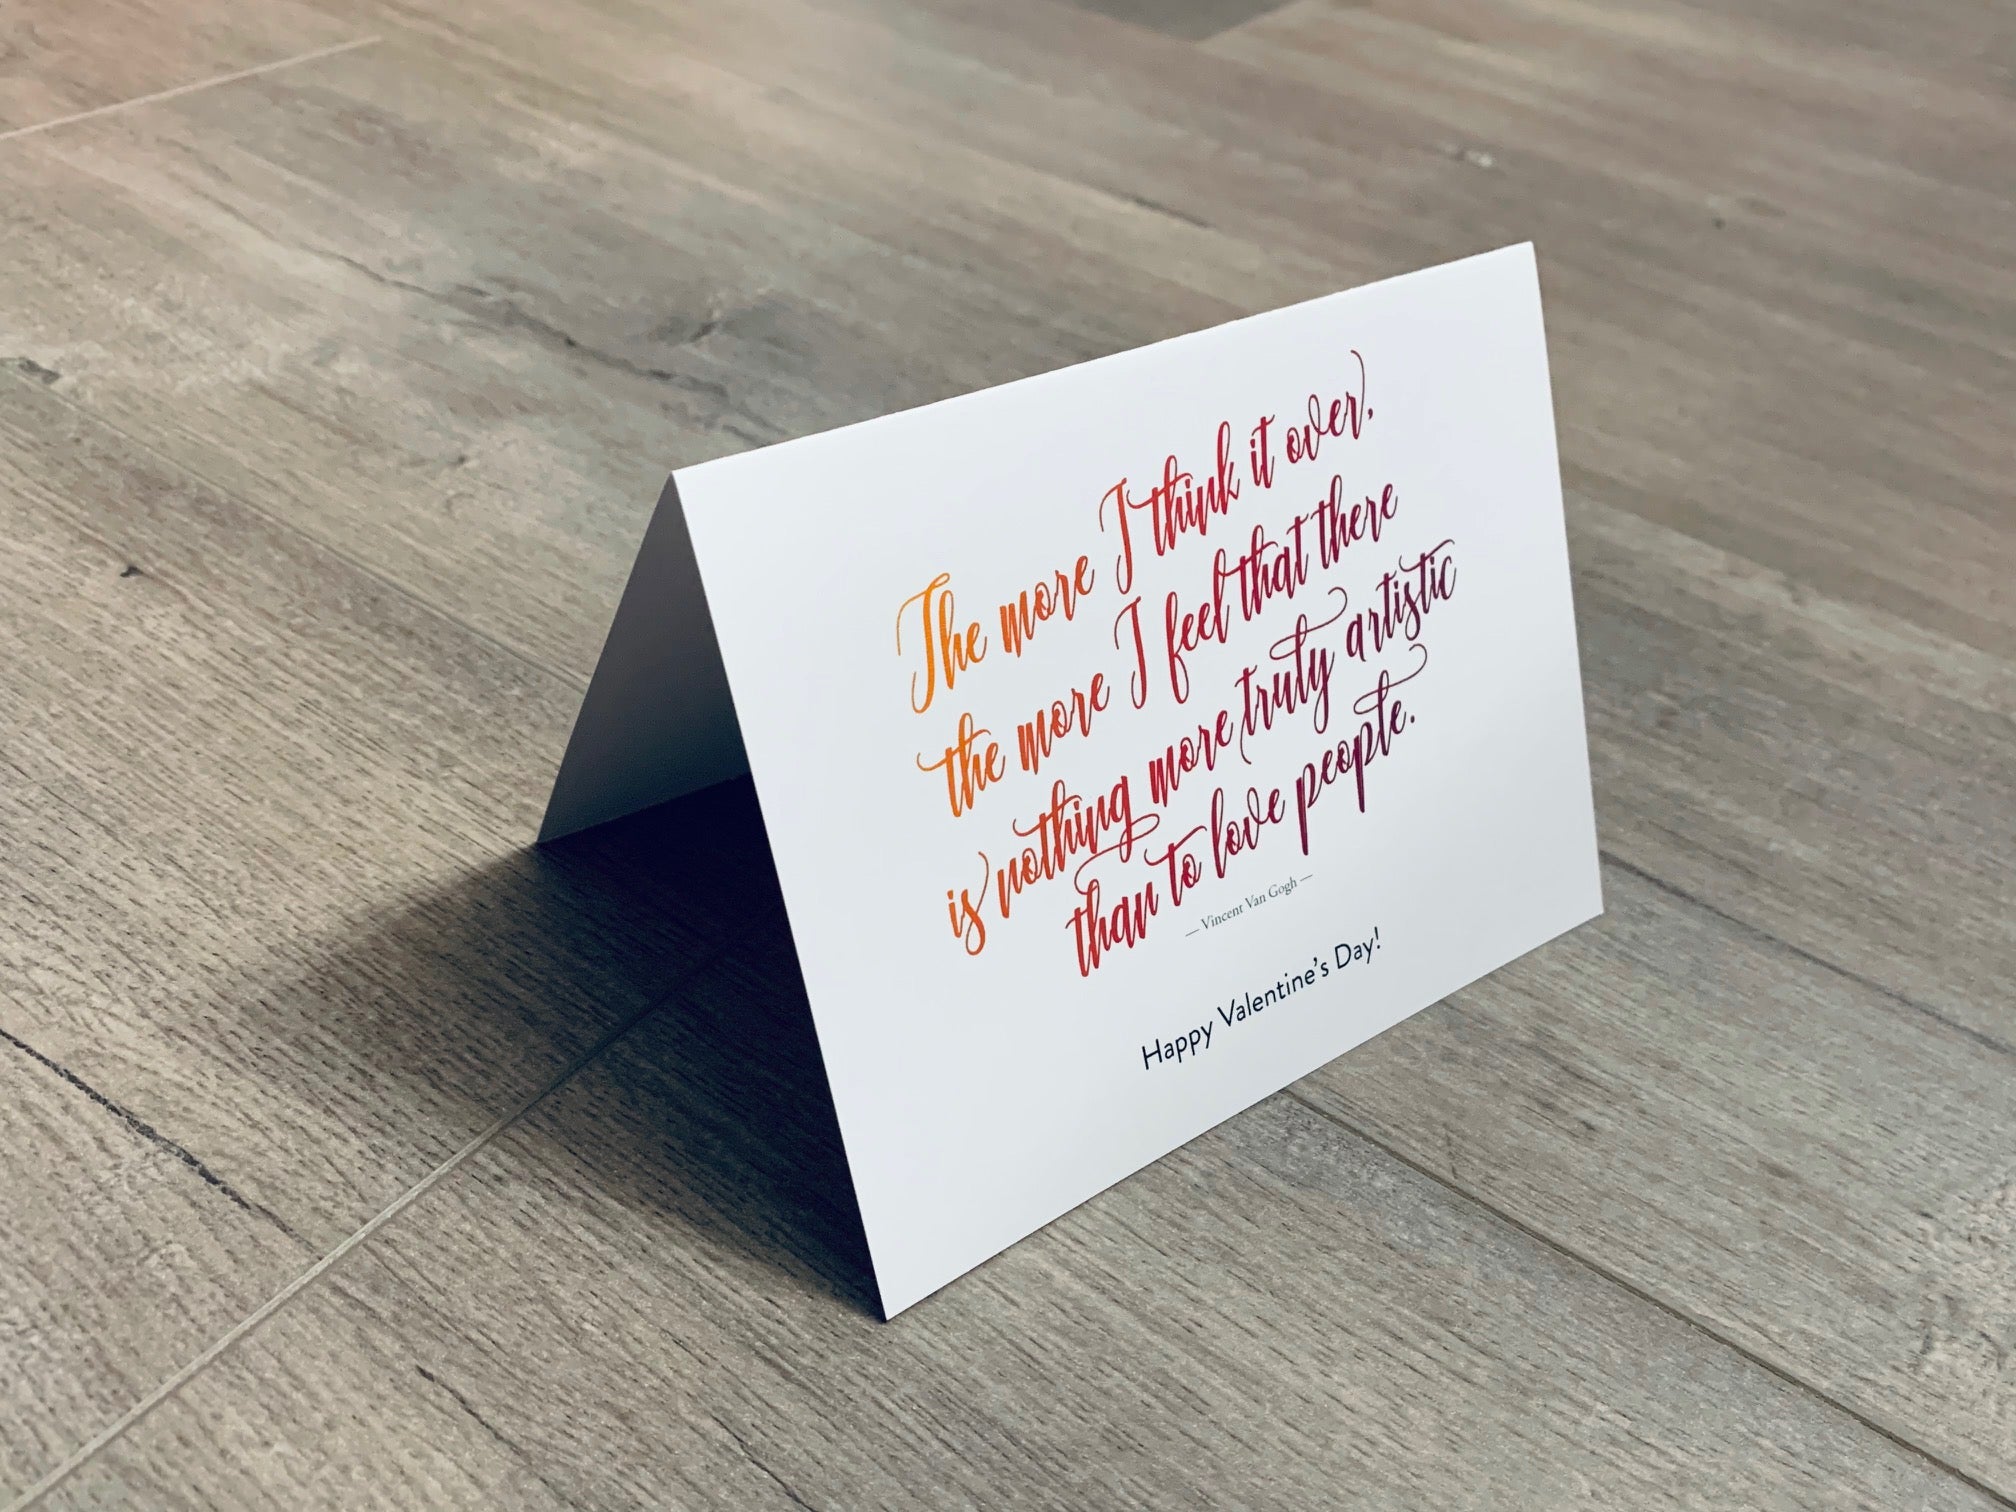 A folded white notecard is folded and propped up on a gray wooden background. The card says, "The more I think it over, the more I feel that there is nothing more truly artistic than to love people. Happy Valentine's Day!" Historic Love collection by Stationare.